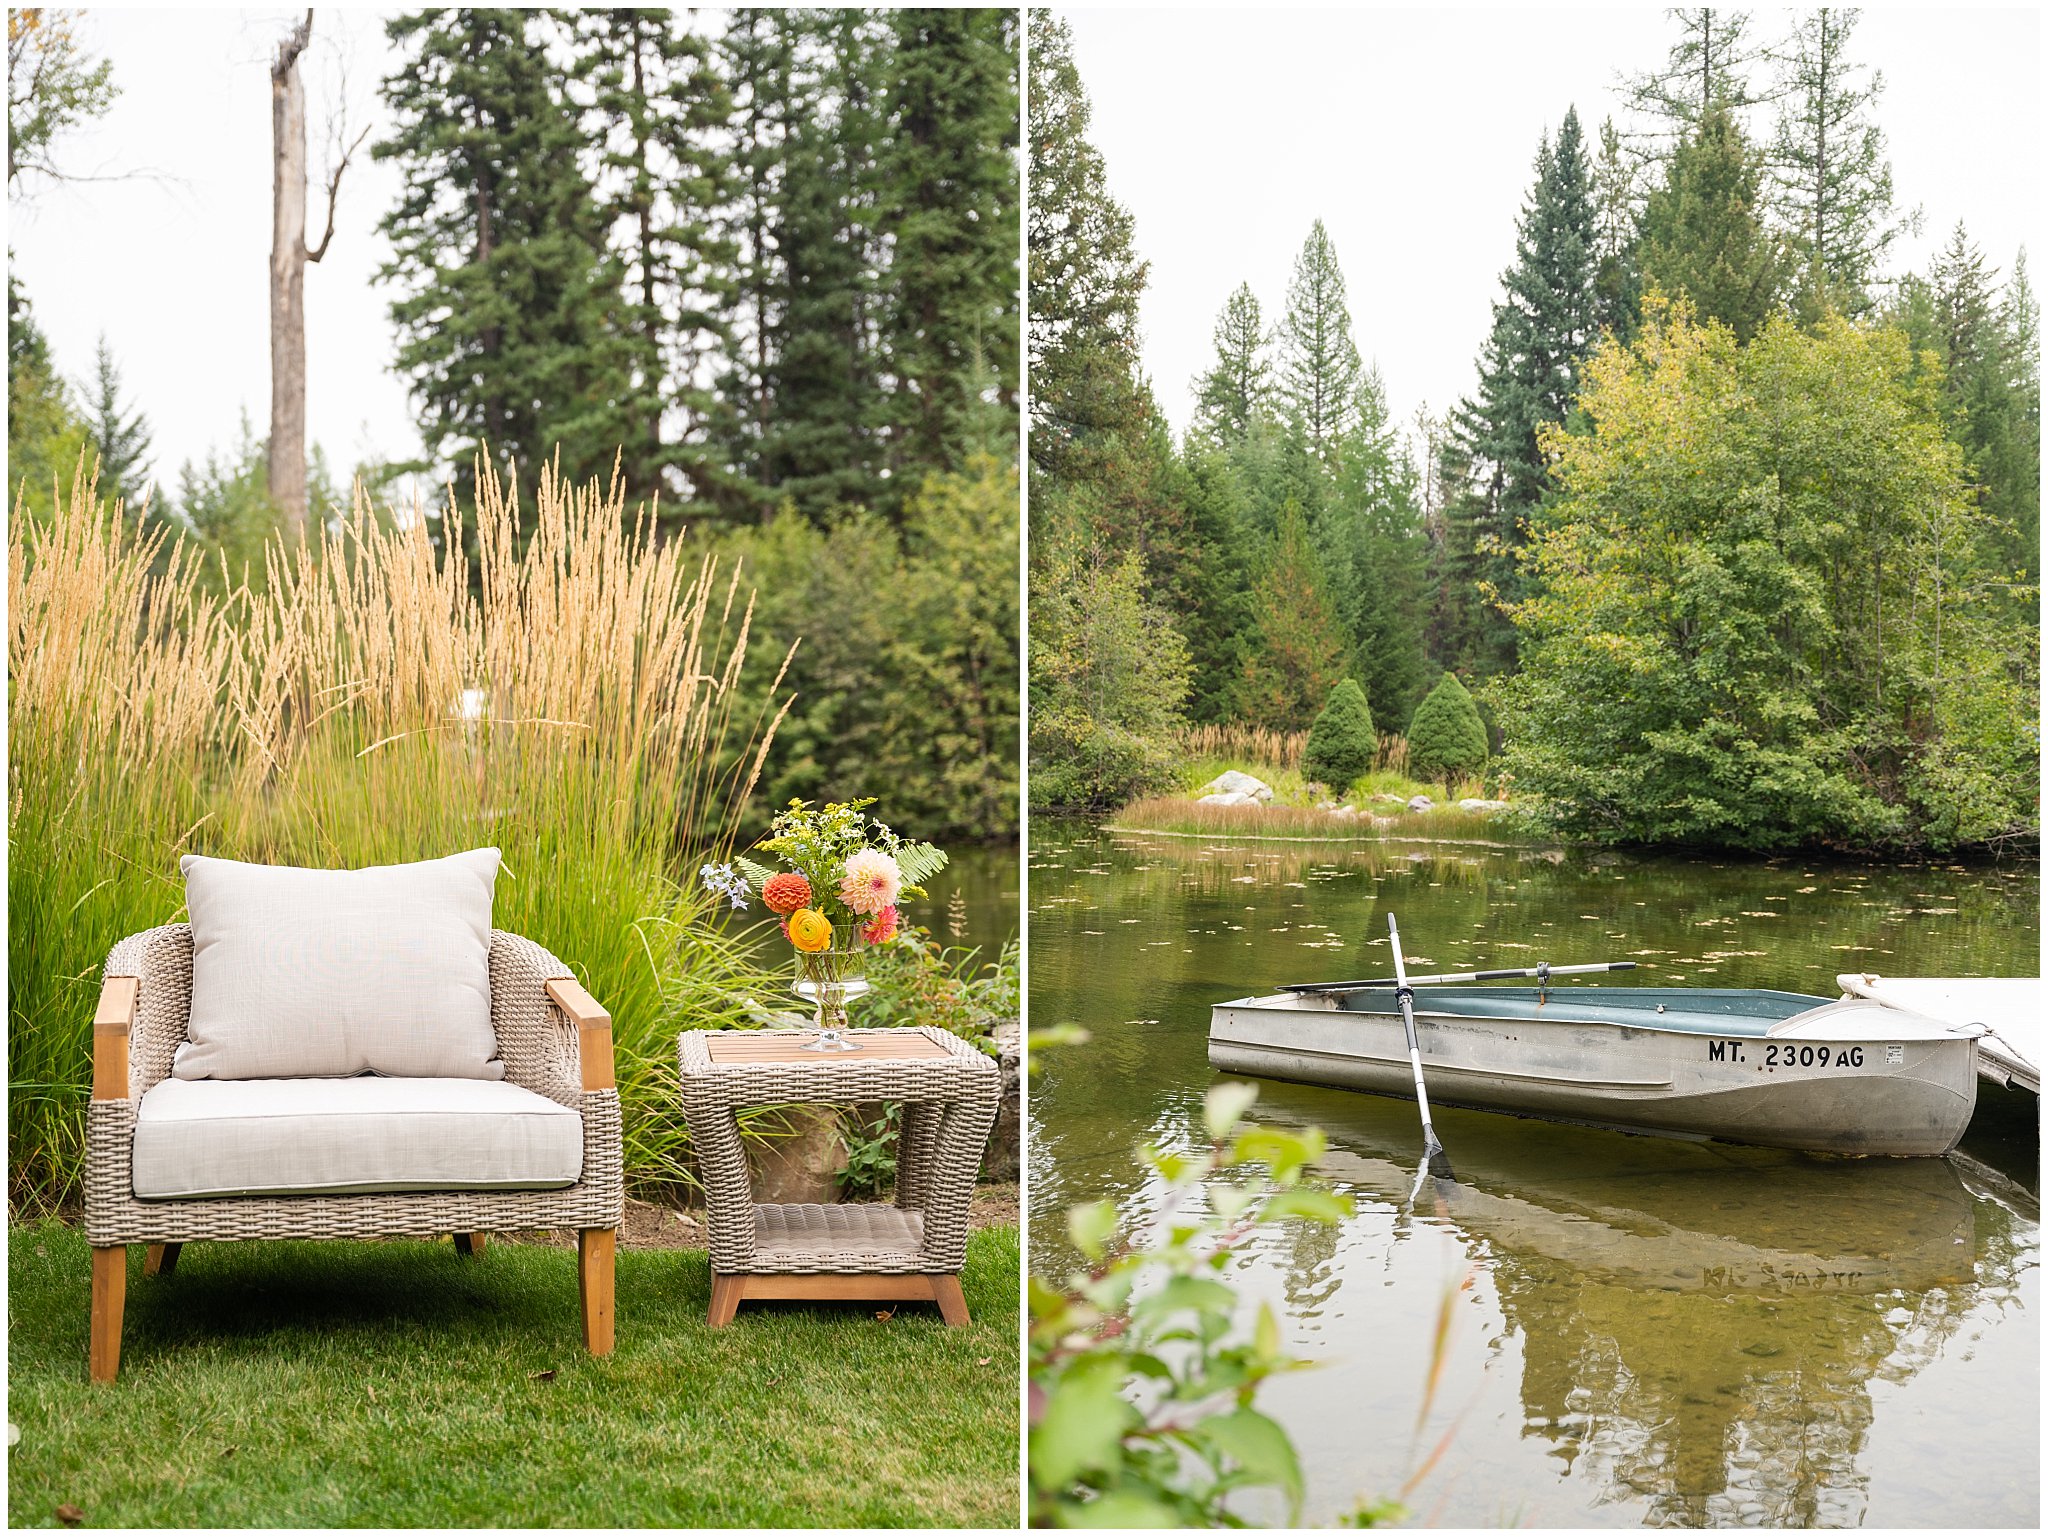 Cocktail hour details by a pond in the Montana forest | Mountainside Weddings Kalispell Montana Destination Wedding | Jessie and Dallin Photography